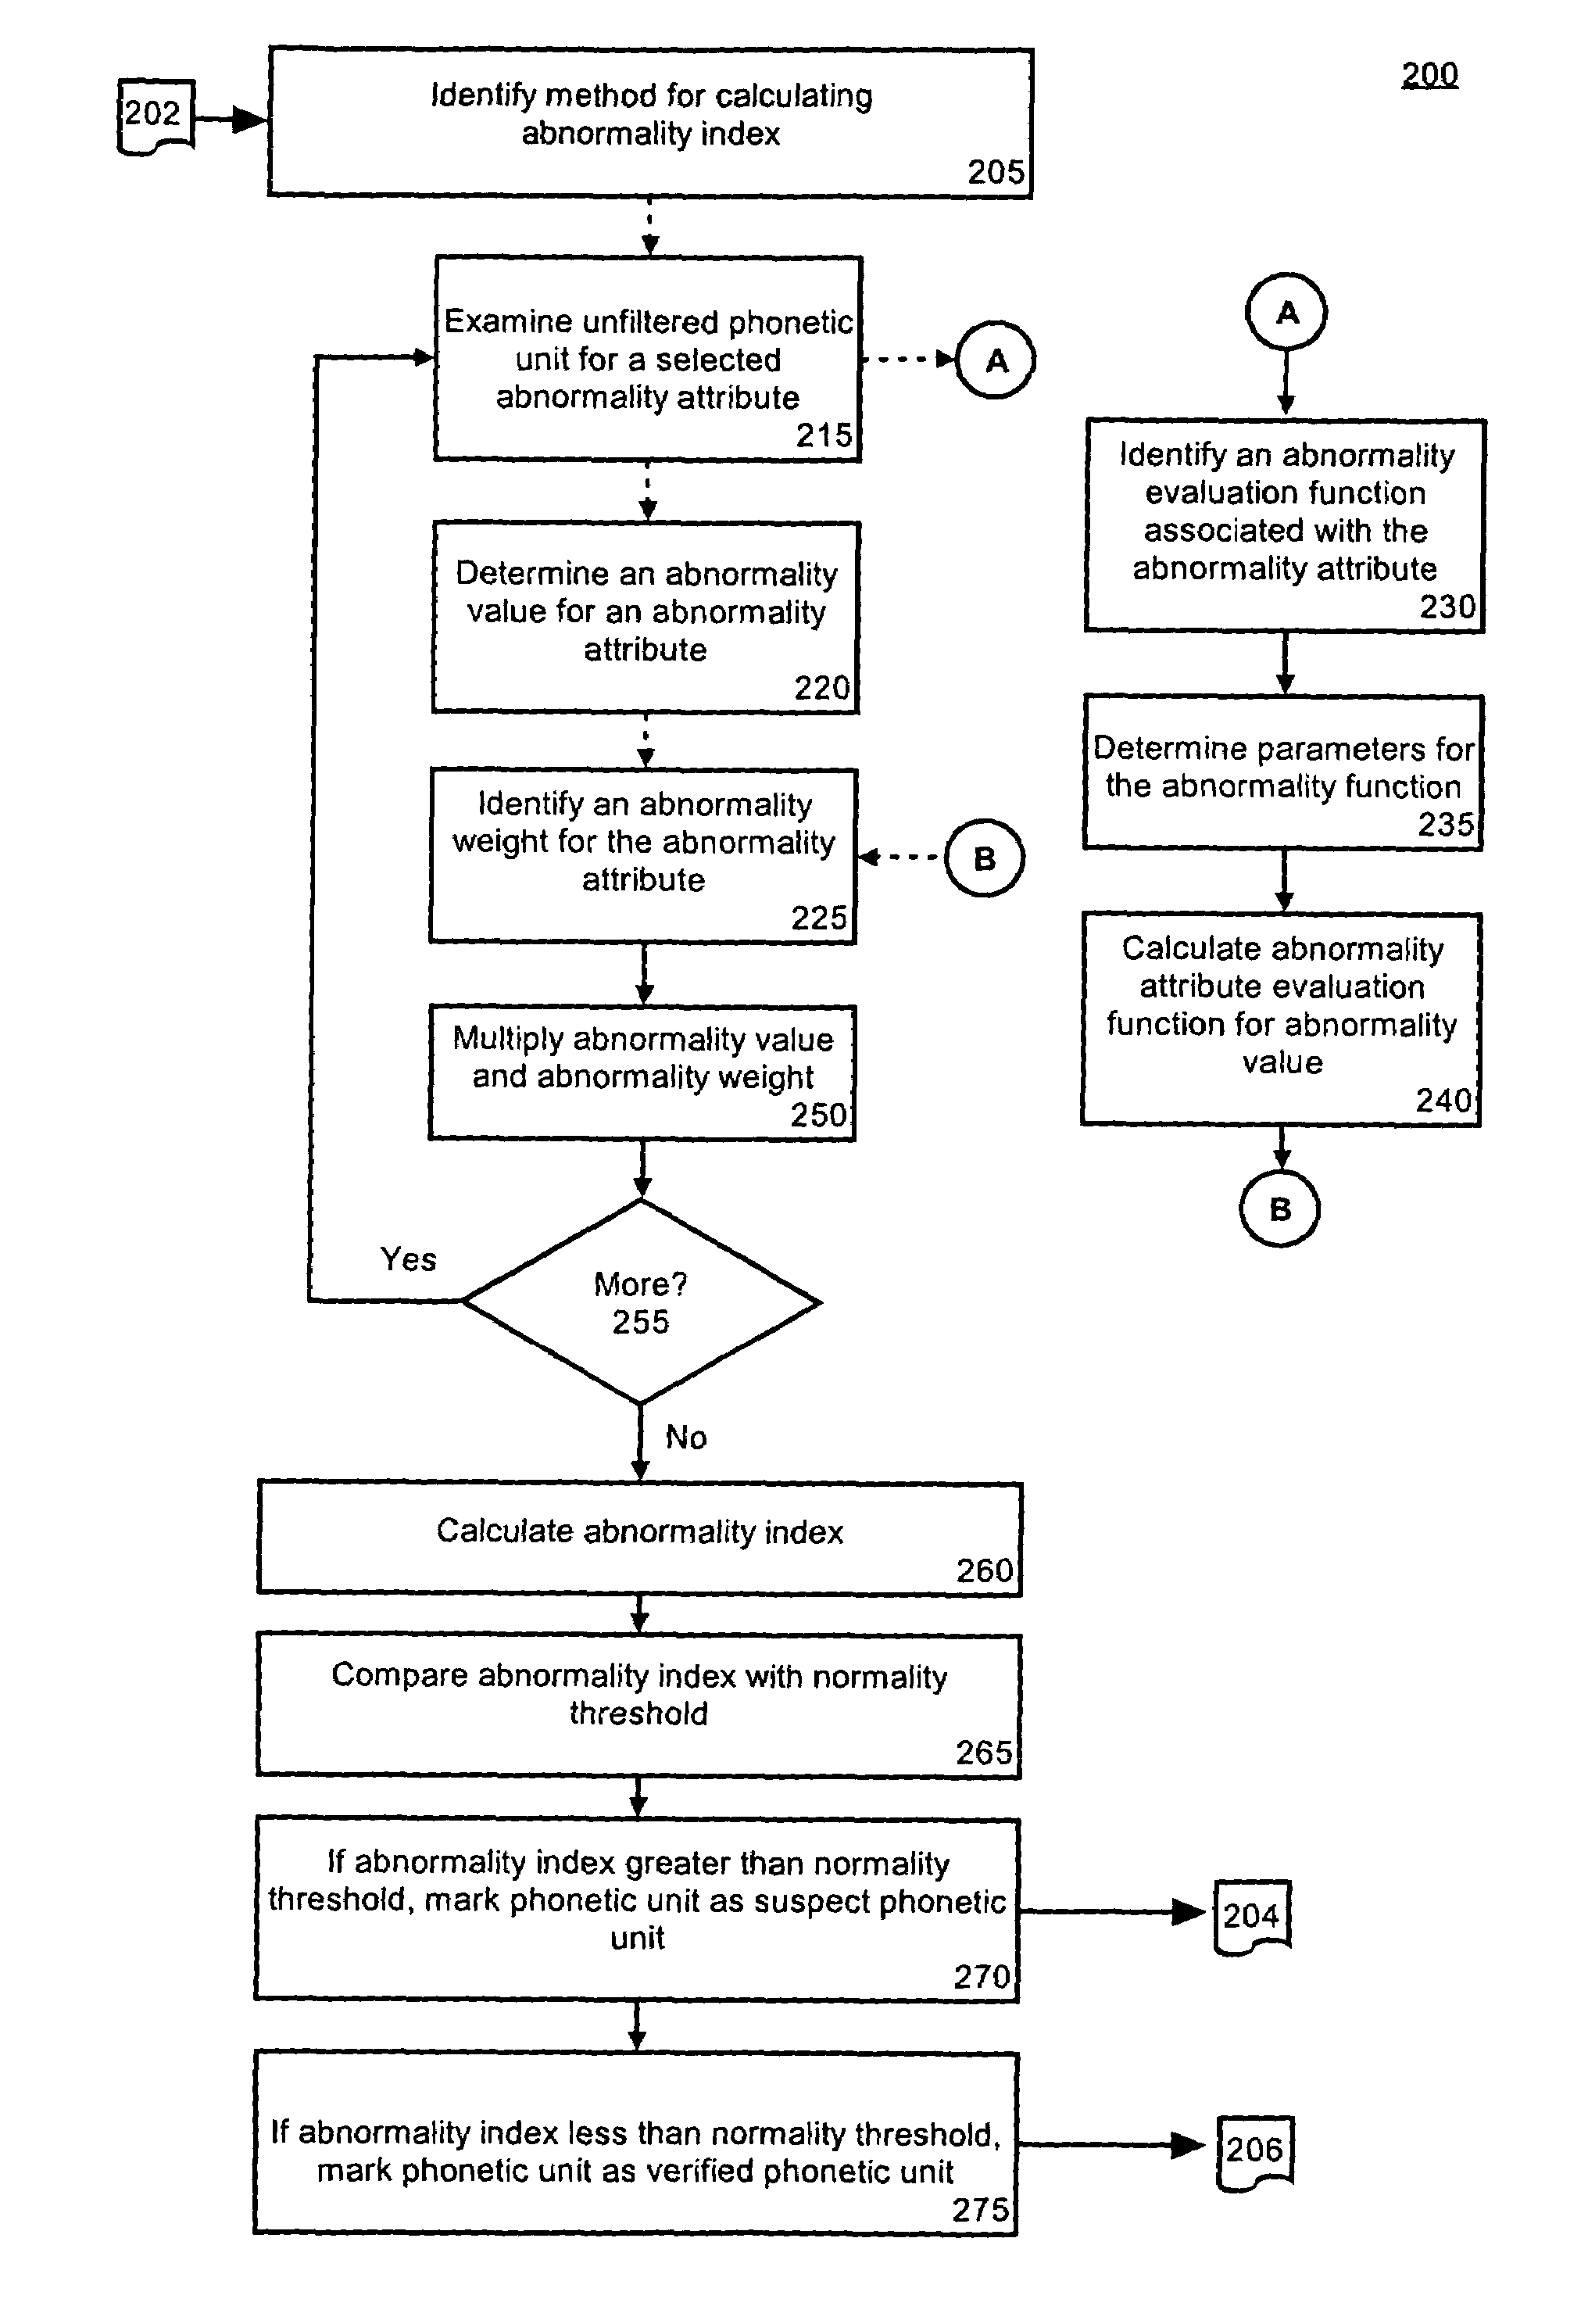 Method for detecting misaligned phonetic units for a concatenative text-to-speech voice